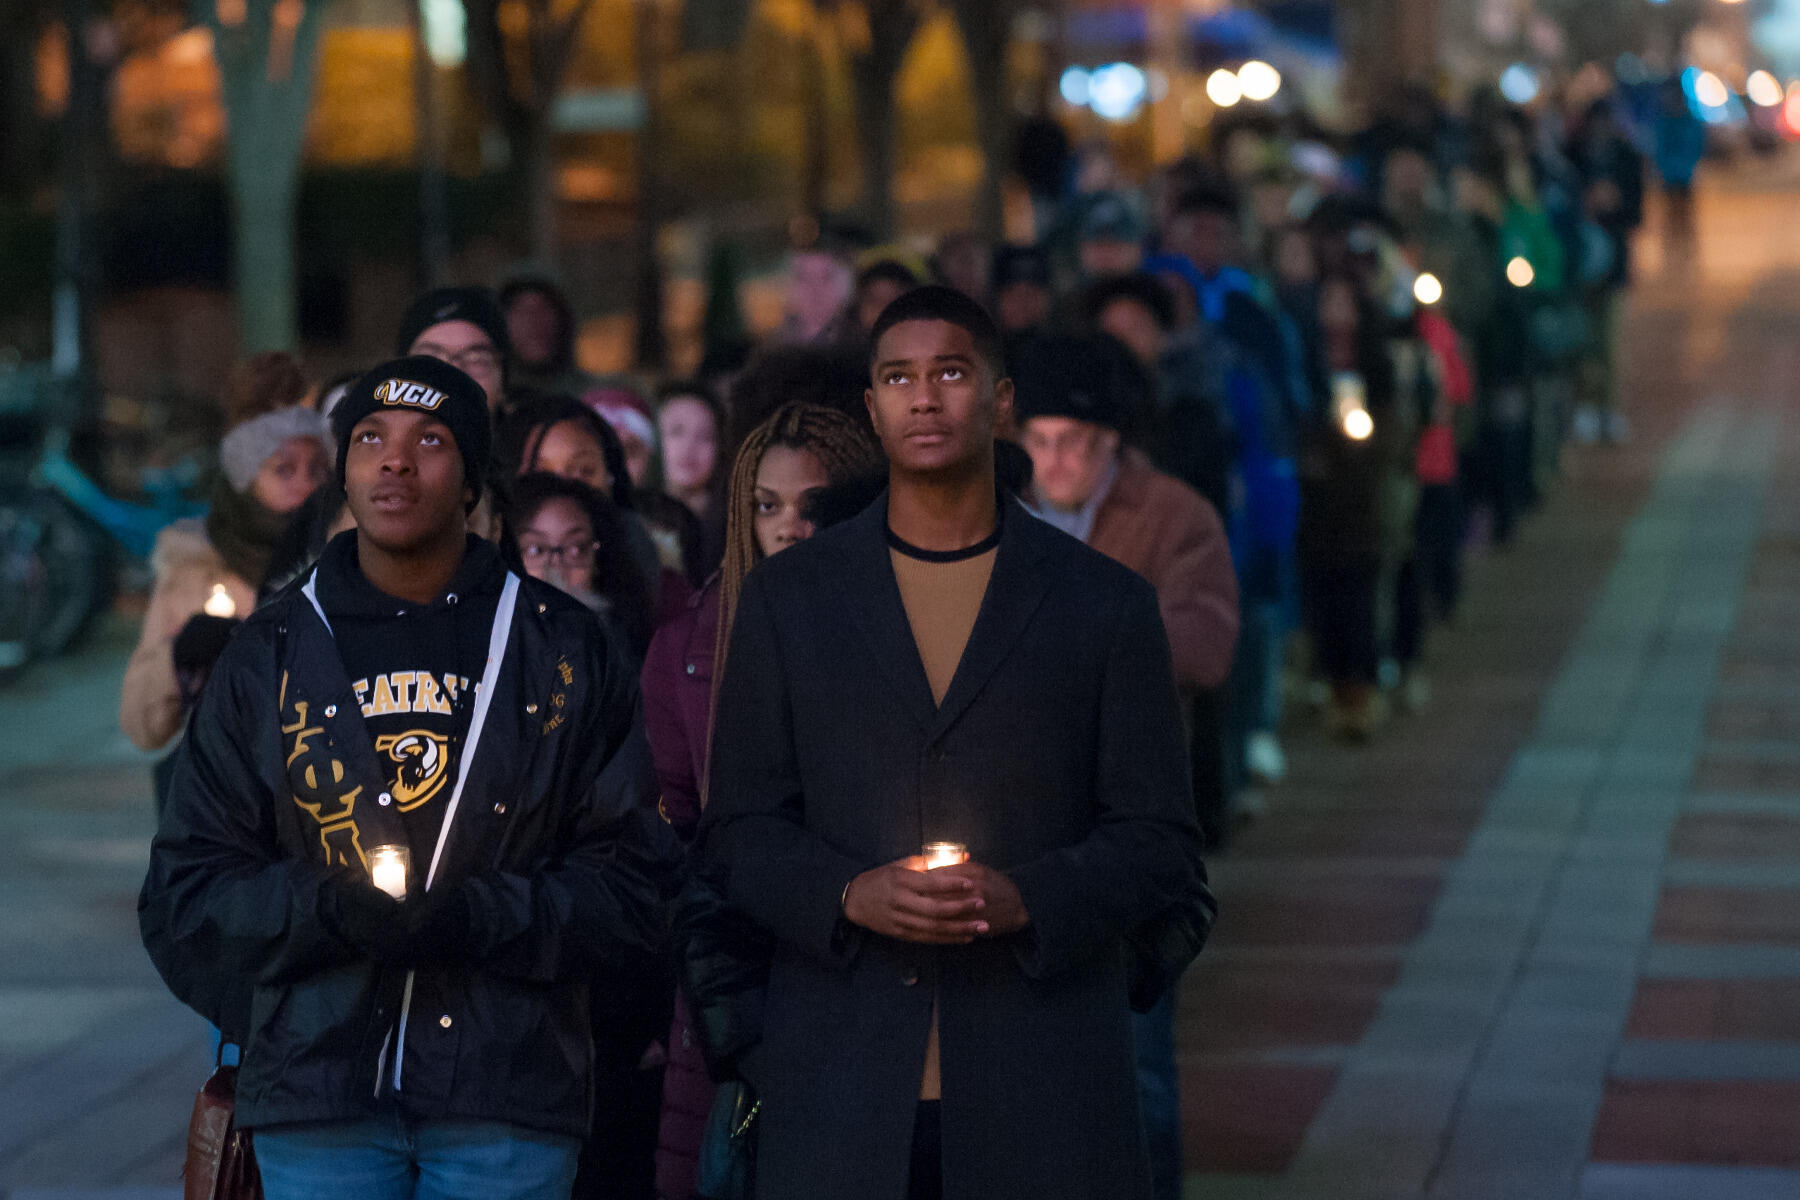 Students stop at Cabell Library last year during the candlelight vigil for Martin Luther King Jr. (Photo by Kevin Morley, University Marketing)

